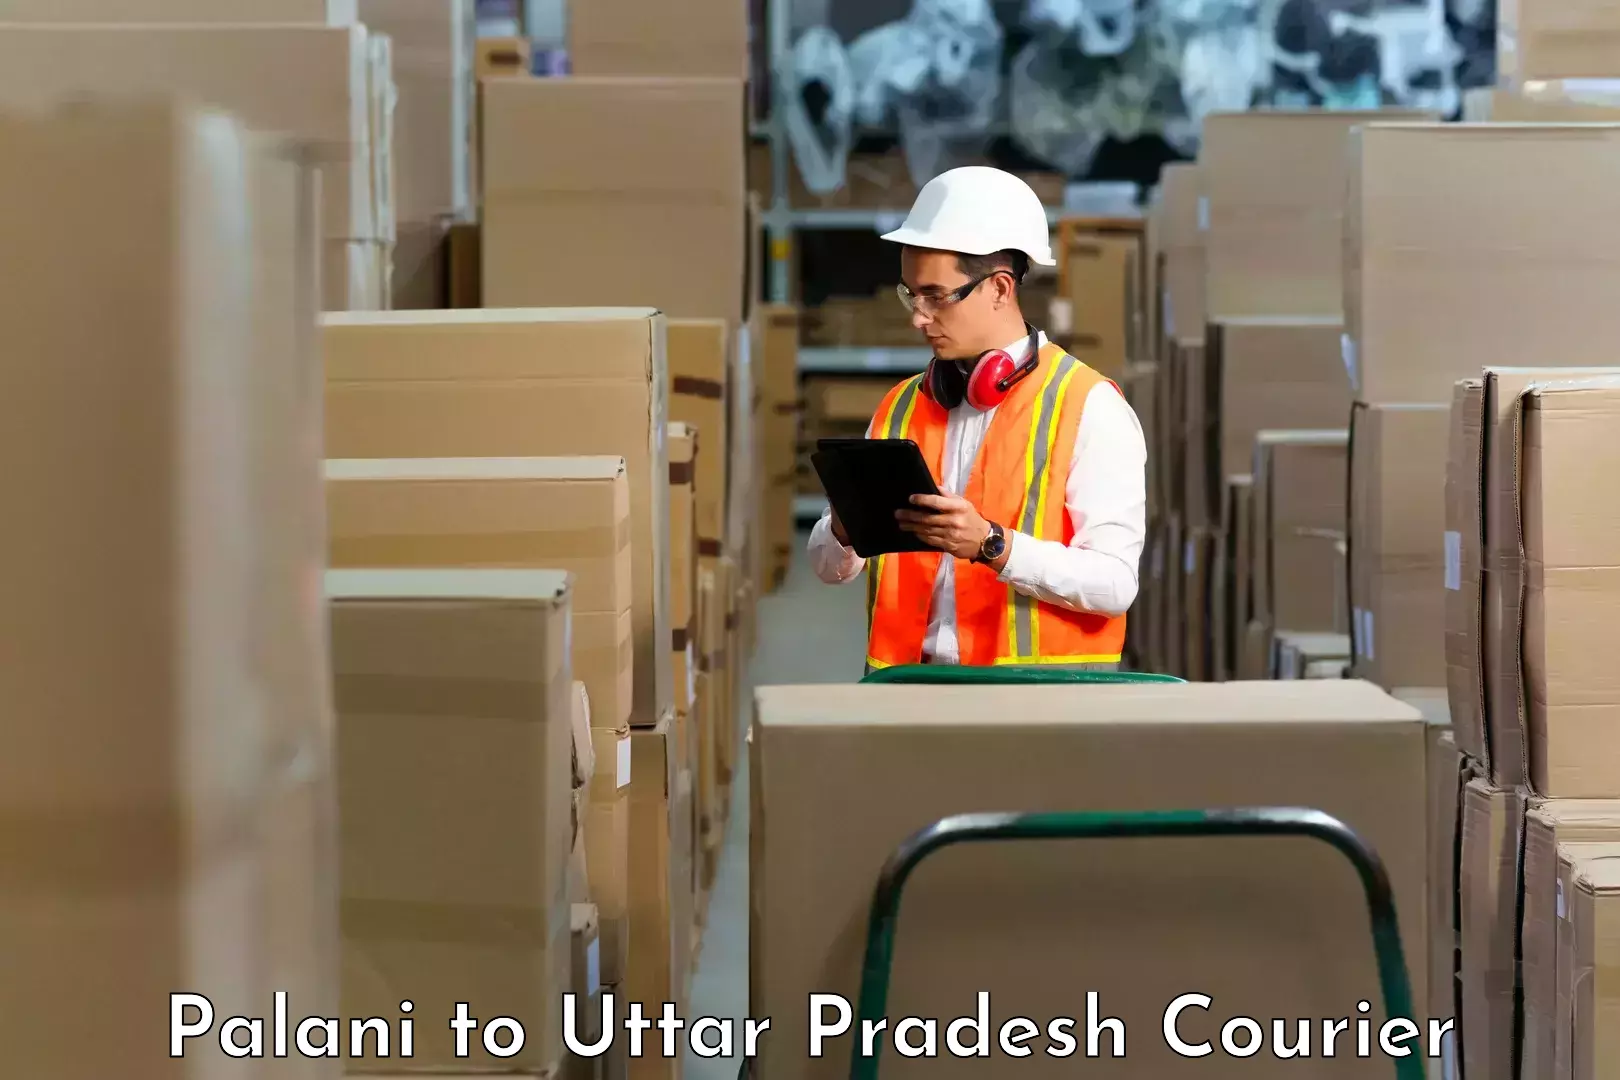 International courier networks Palani to Anupshahar